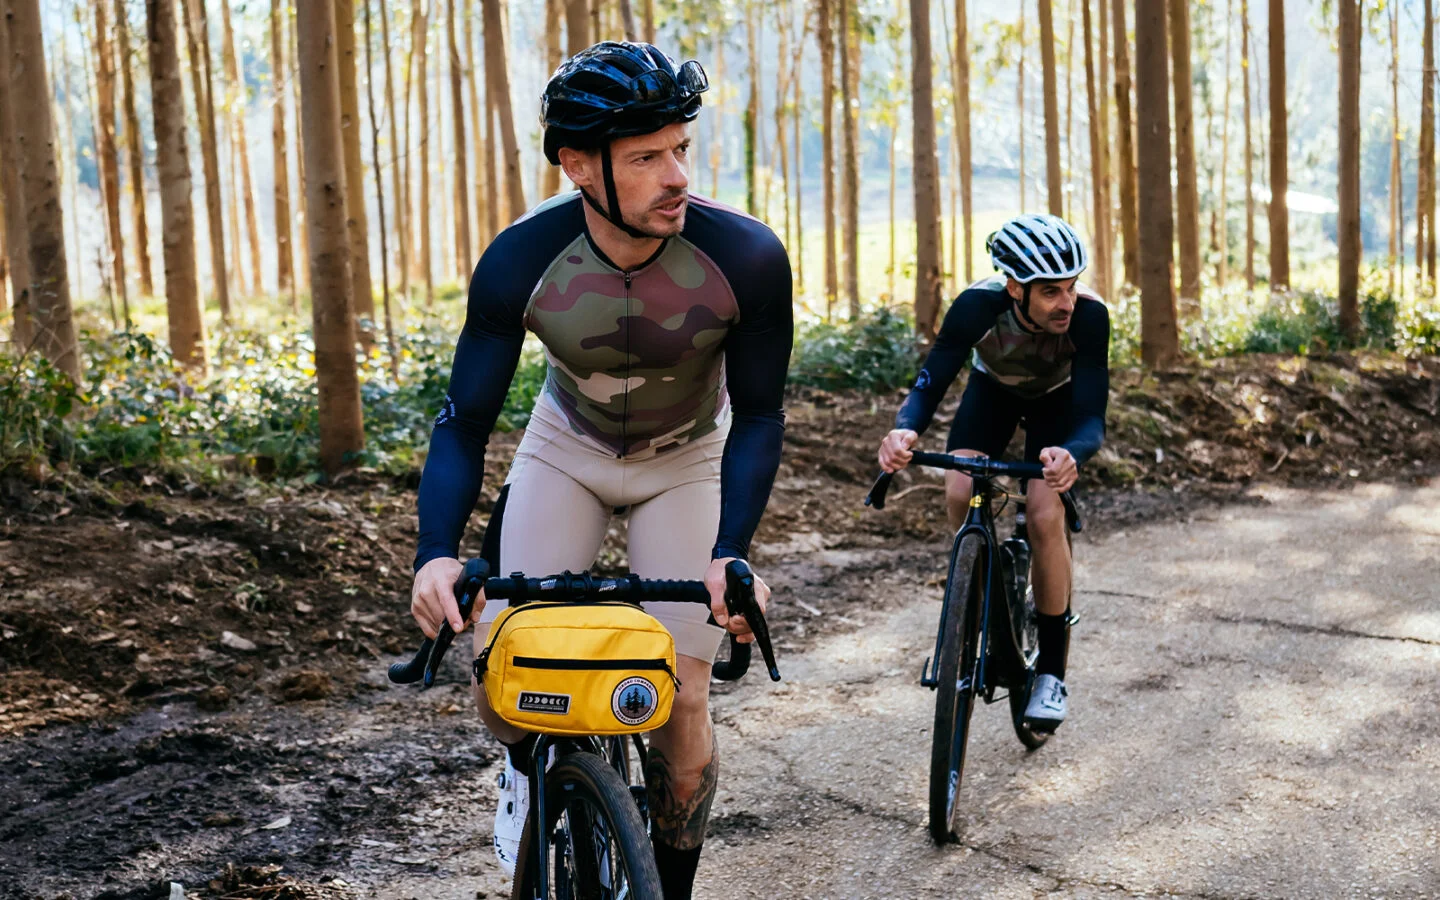 Siroko gravel cycling apparel Design, comfort and resistance on any terrain